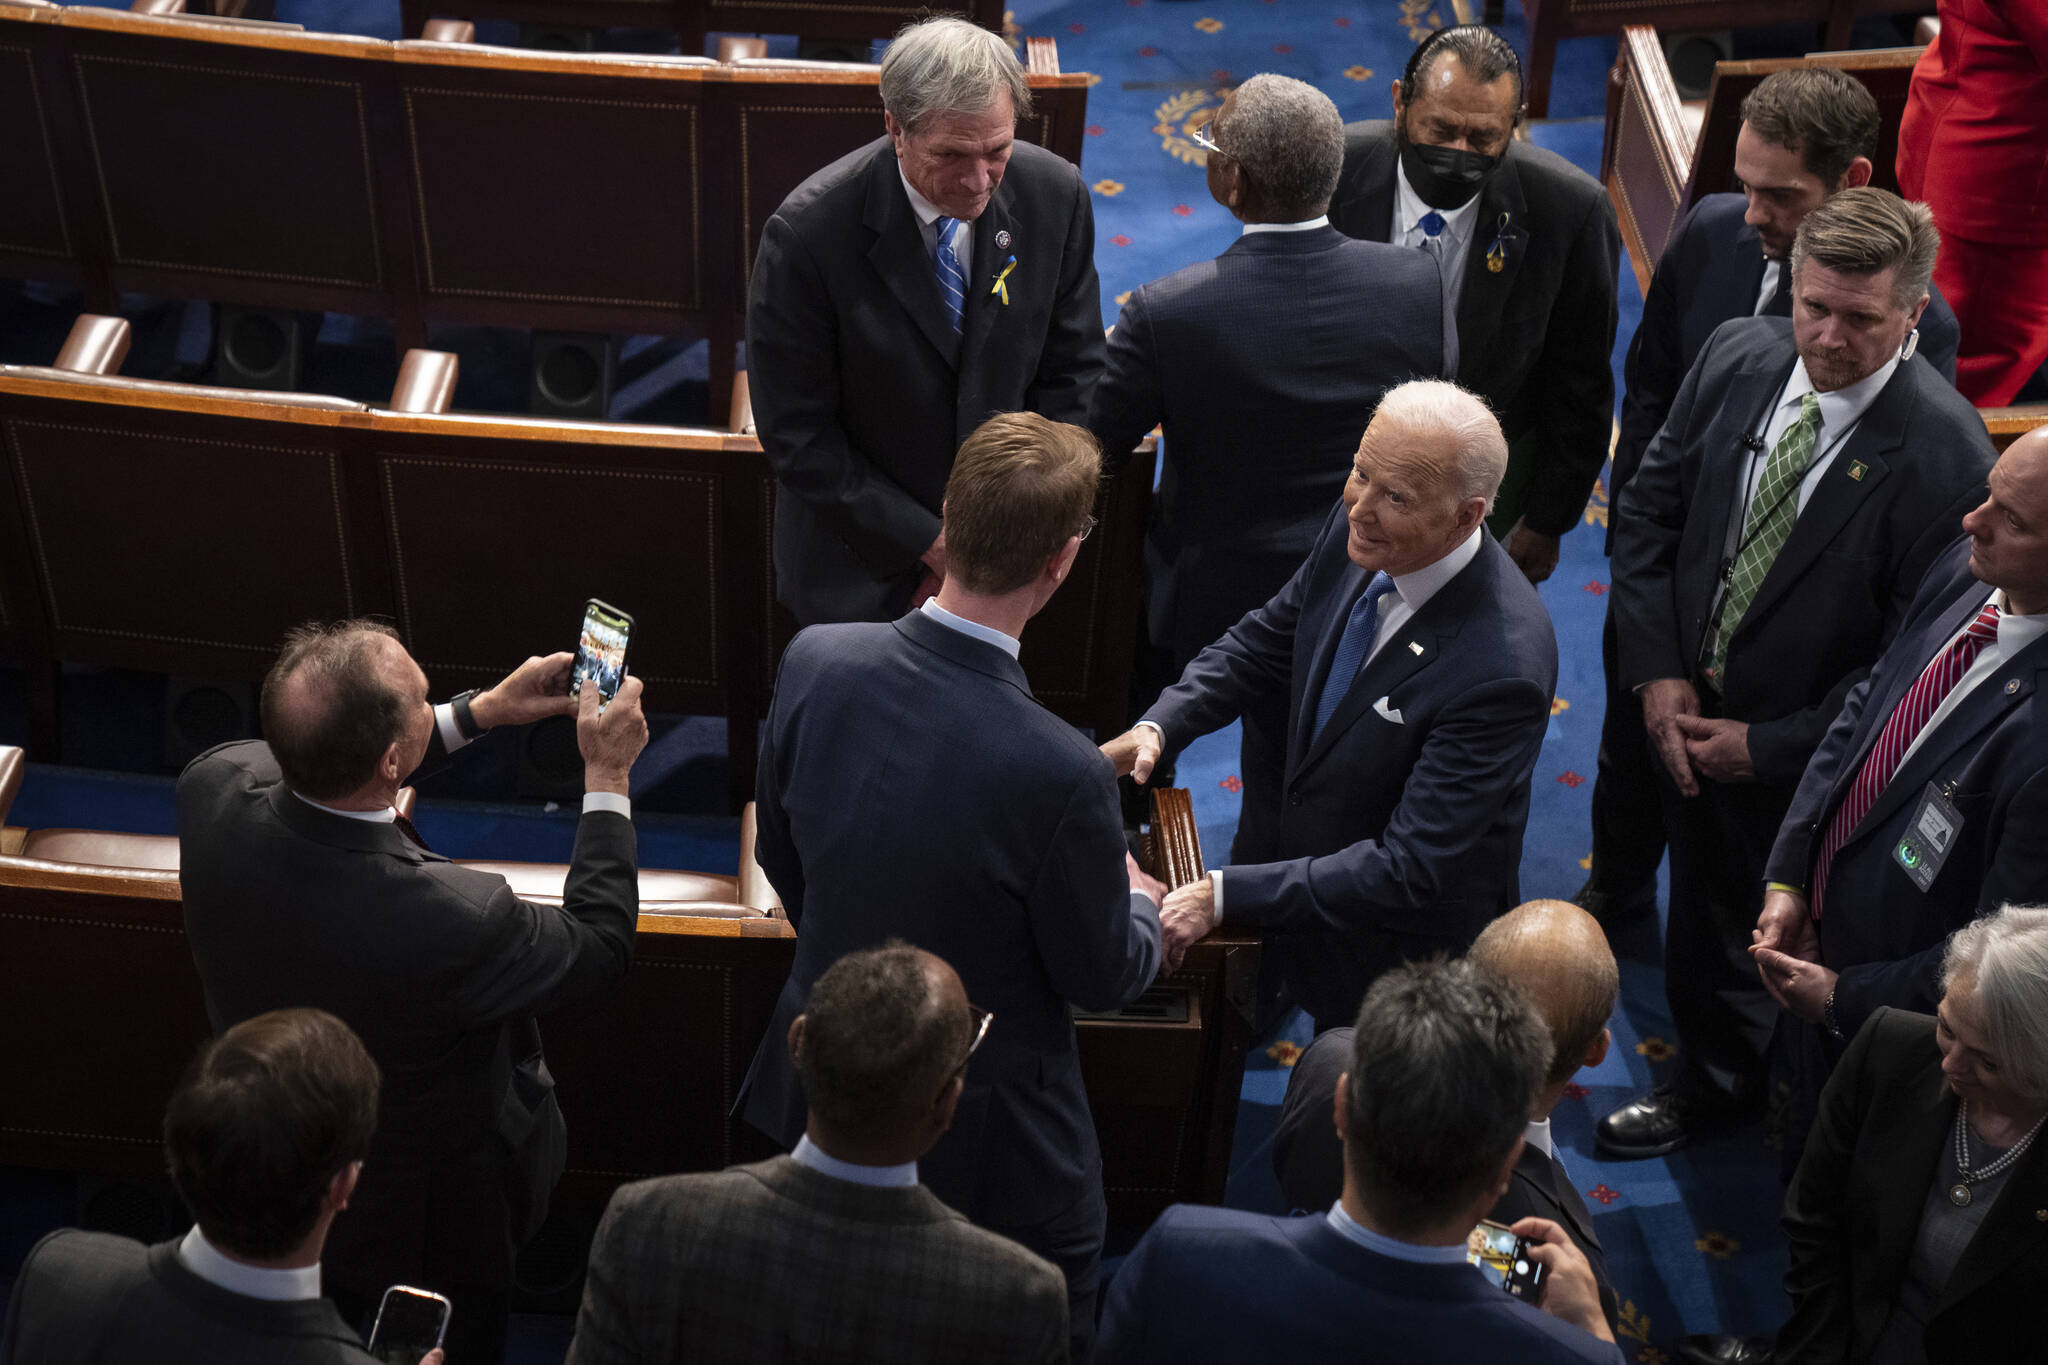 President Joe Biden greets people after his first State of the Union address to a joint session of Congress at the Capitol, Tuesday, March 1, 2022, in Washington. (Sarahbeth Maney/The New York Times via AP, Pool)